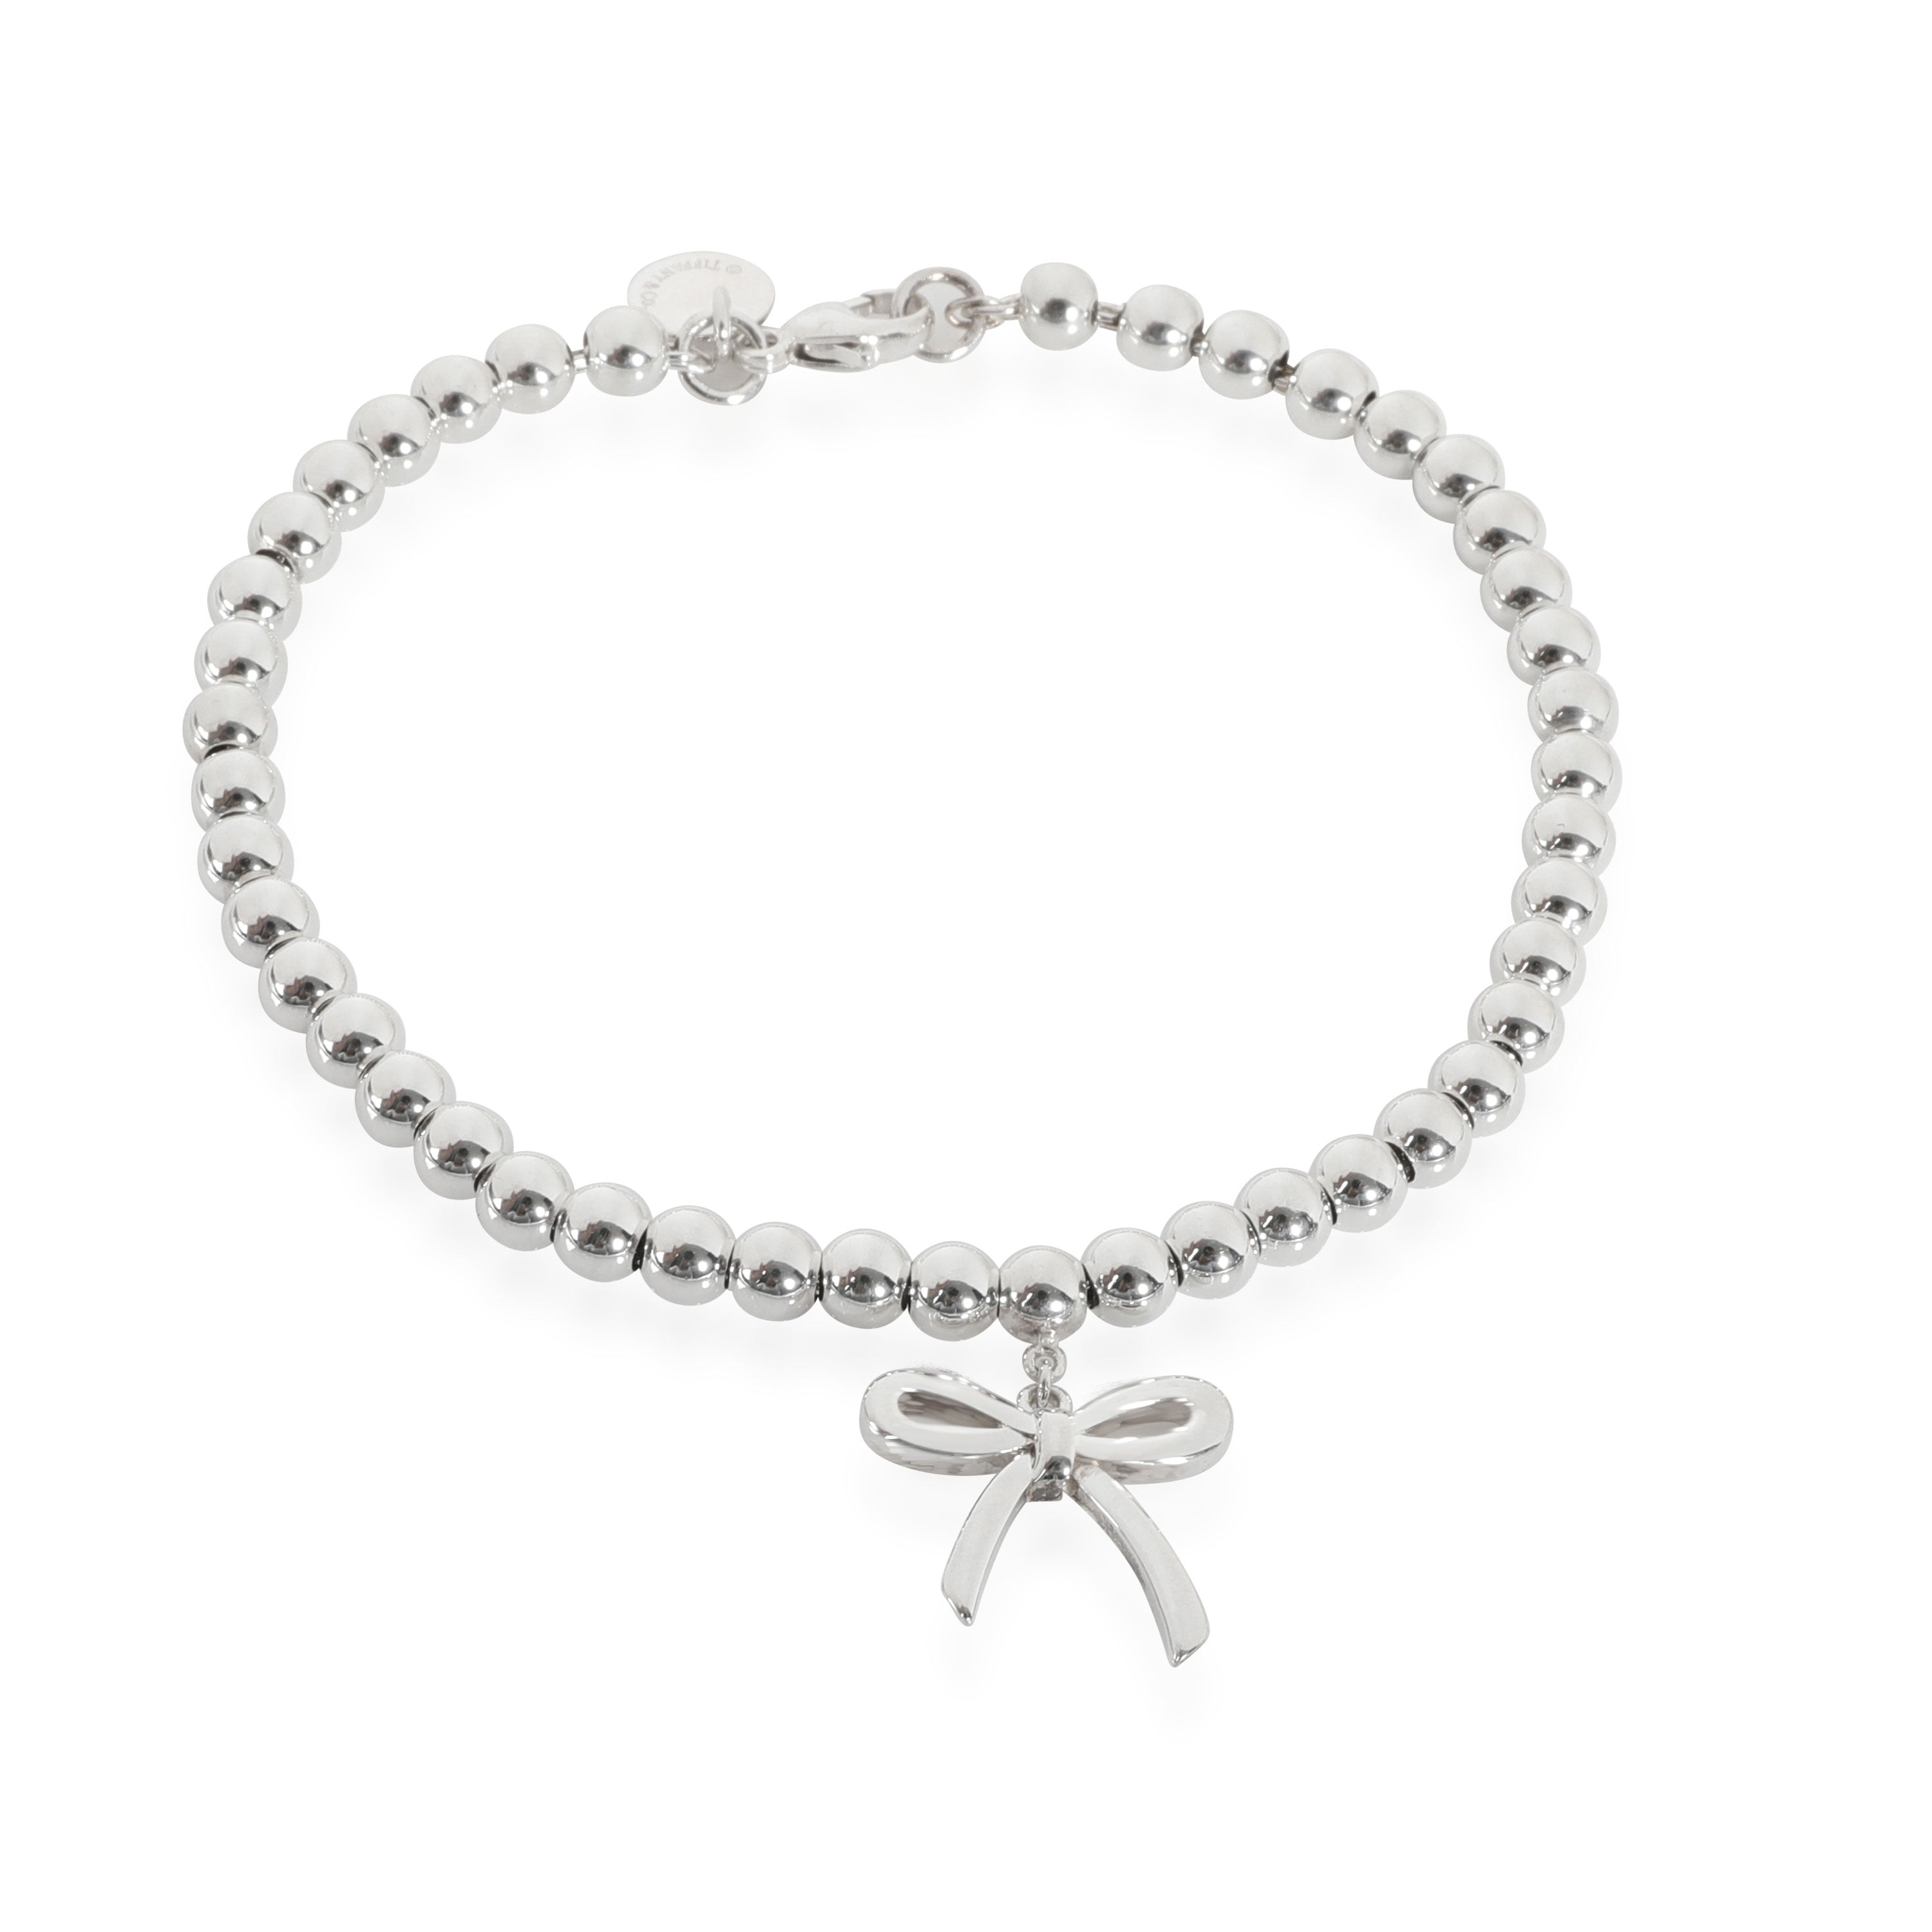 Tiffany & Co. Bow charm Bead Bracelet in Sterling Silver by WP